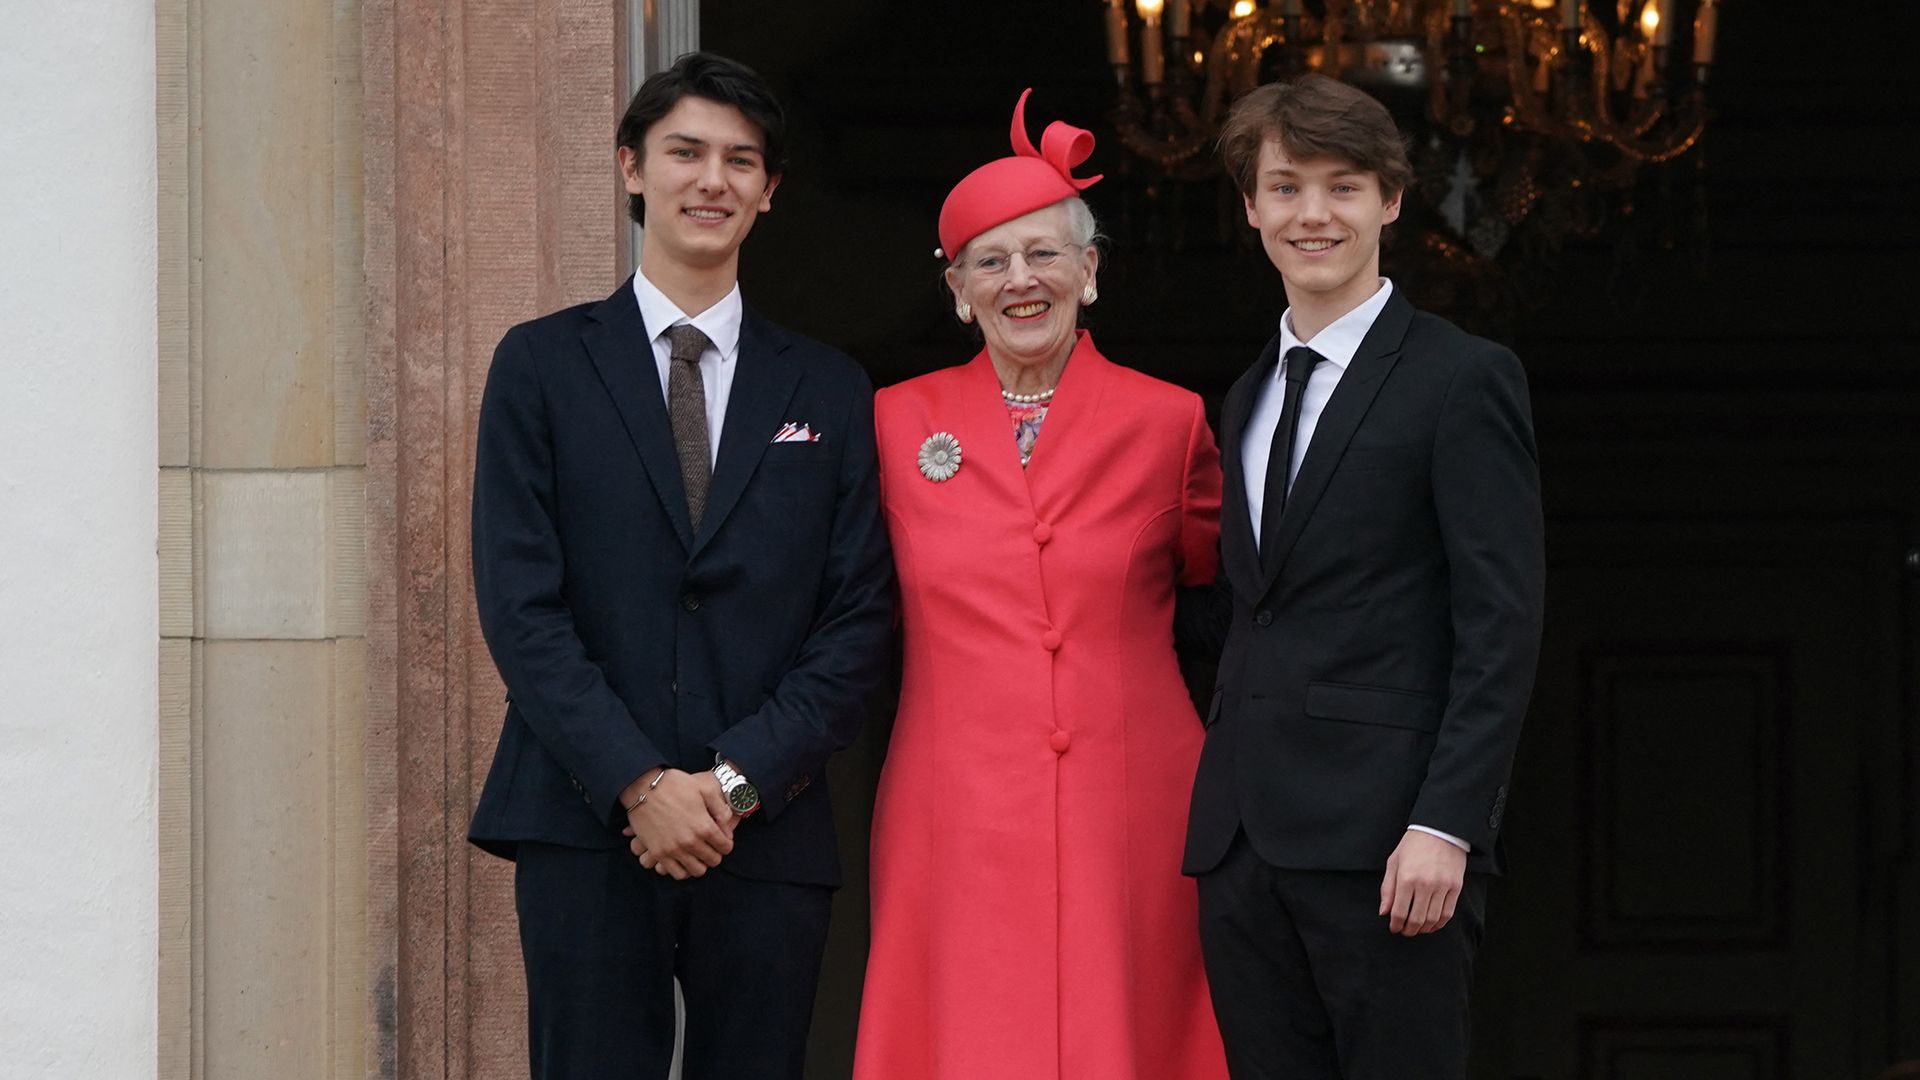 Count Nikolai and Count Felix with their grandmother Queen Margethe II 